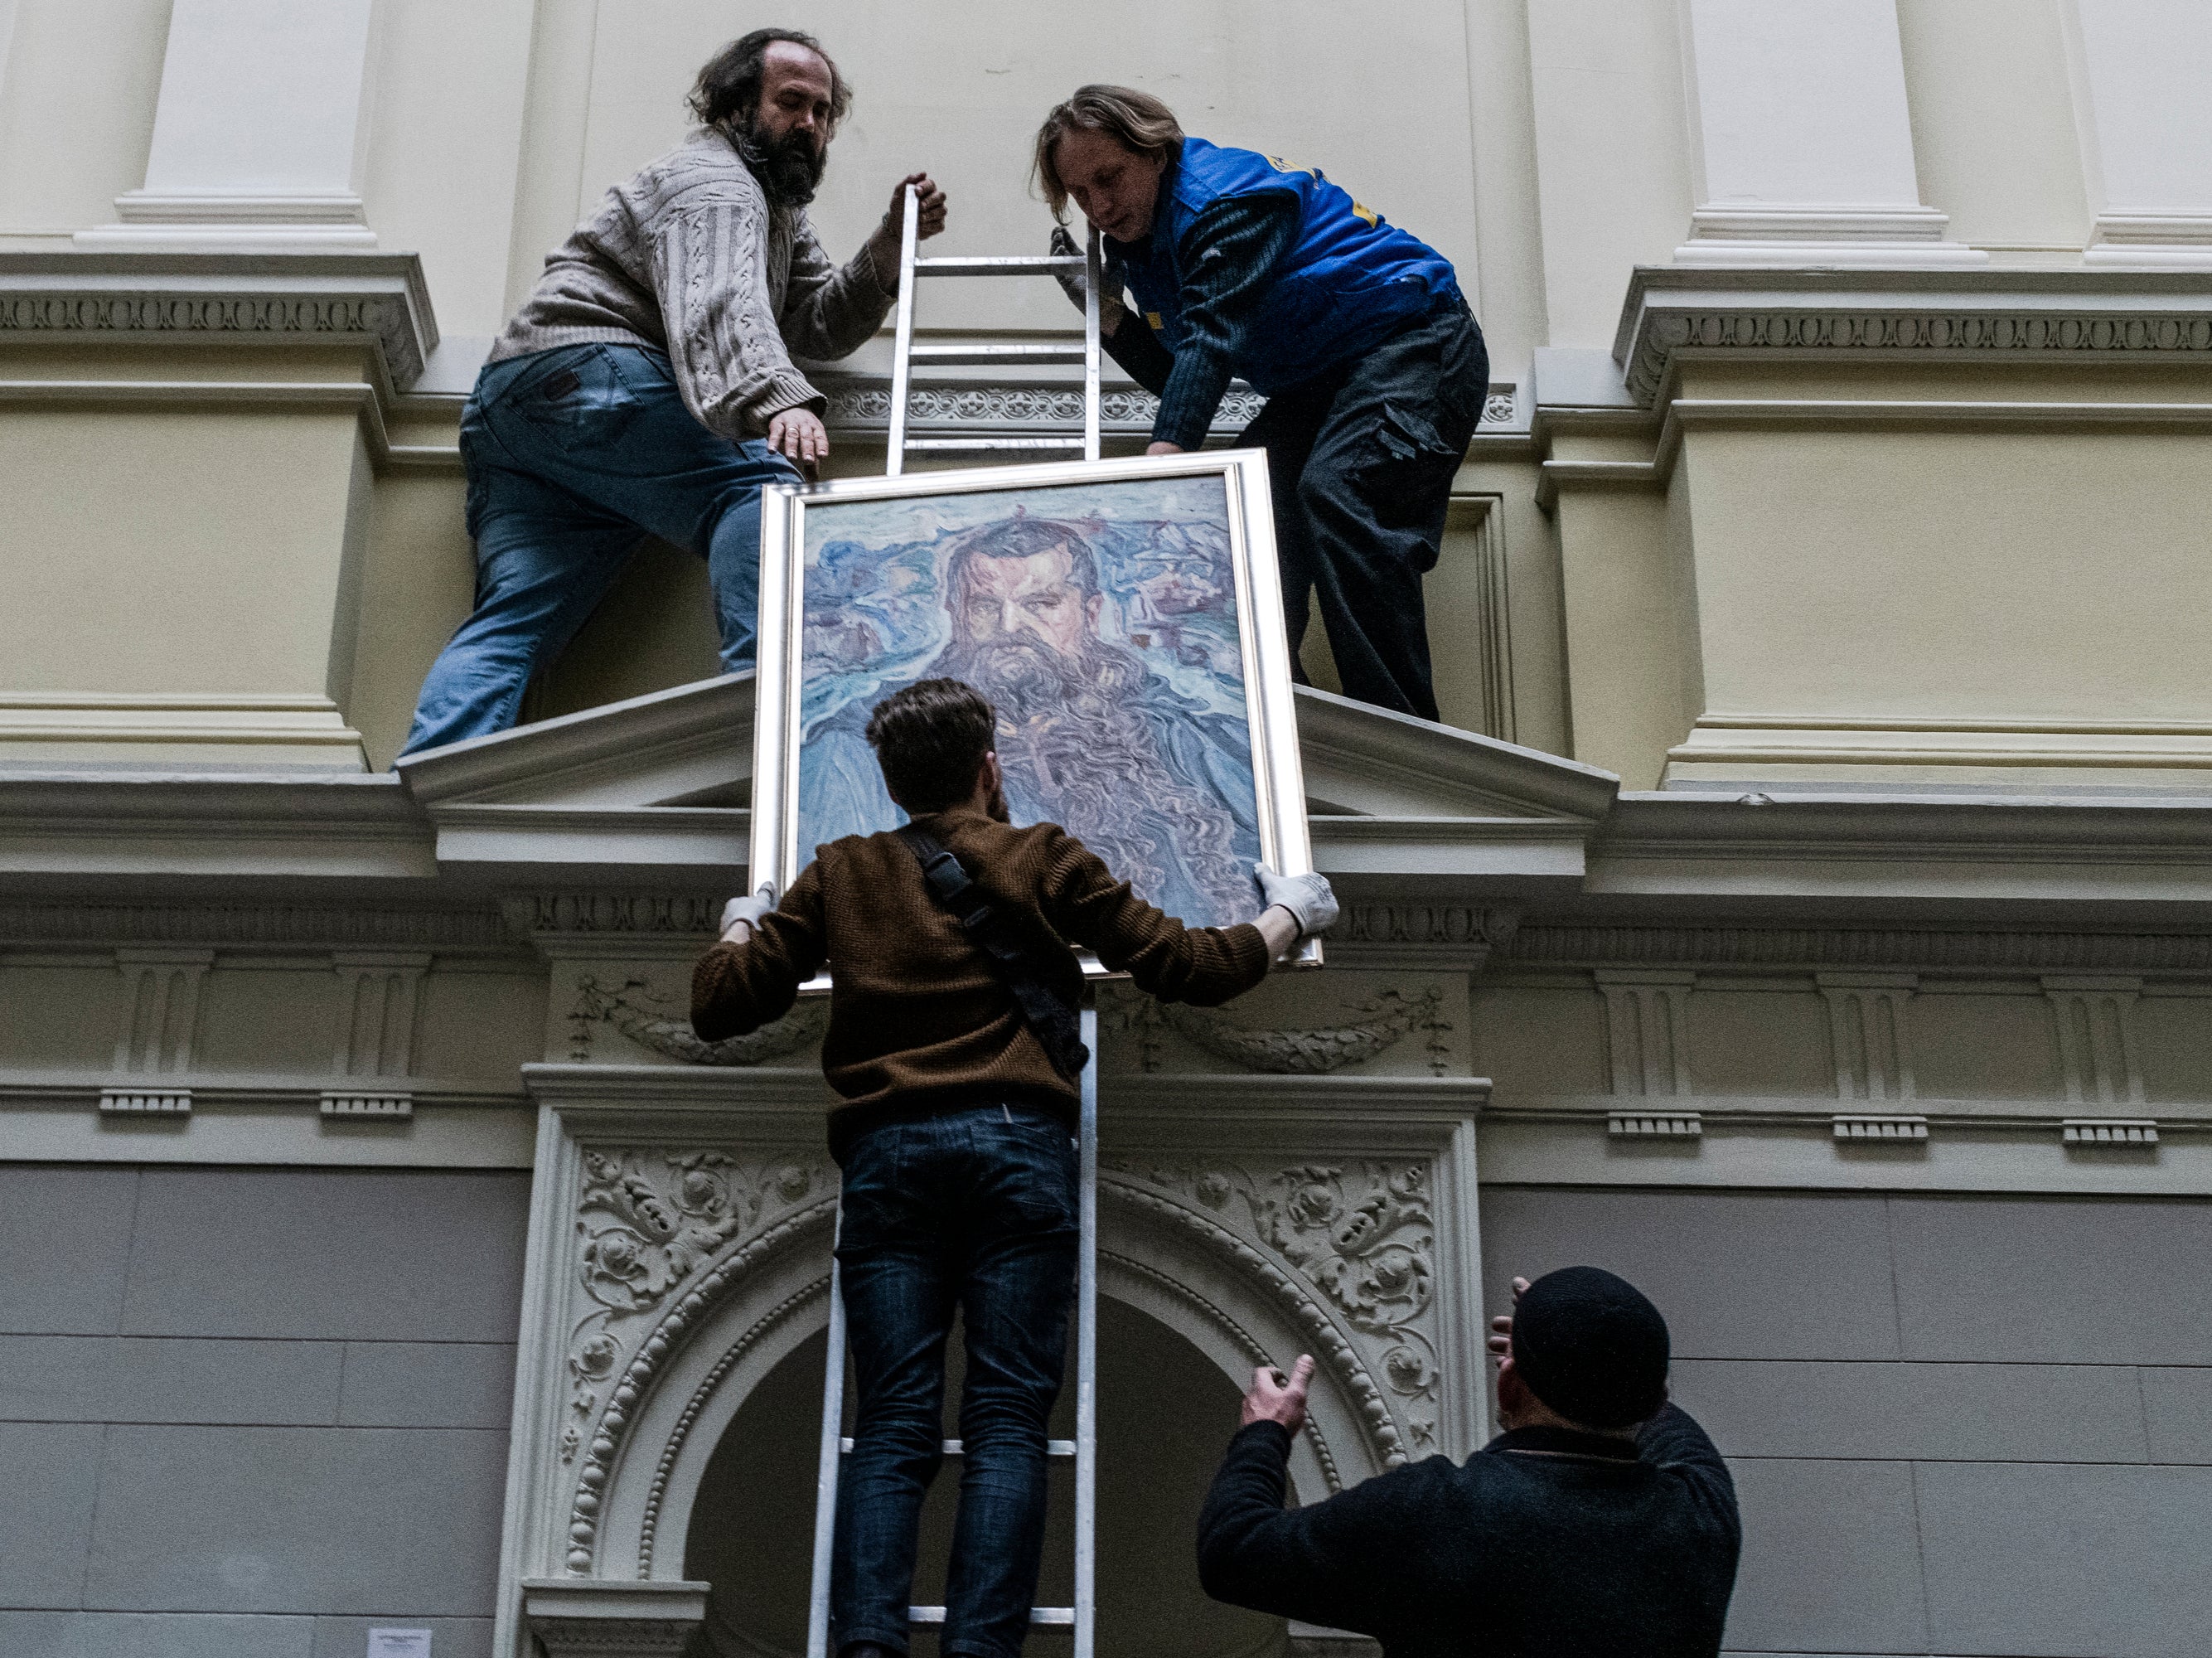 The portrait of metropolitan archbishop Andrey Sheptytsky painted by Oleksa Novakivsky is the last painting to be taken down from the walls in the Andrey Sheptytsky National Museum in Lviv on 7 March